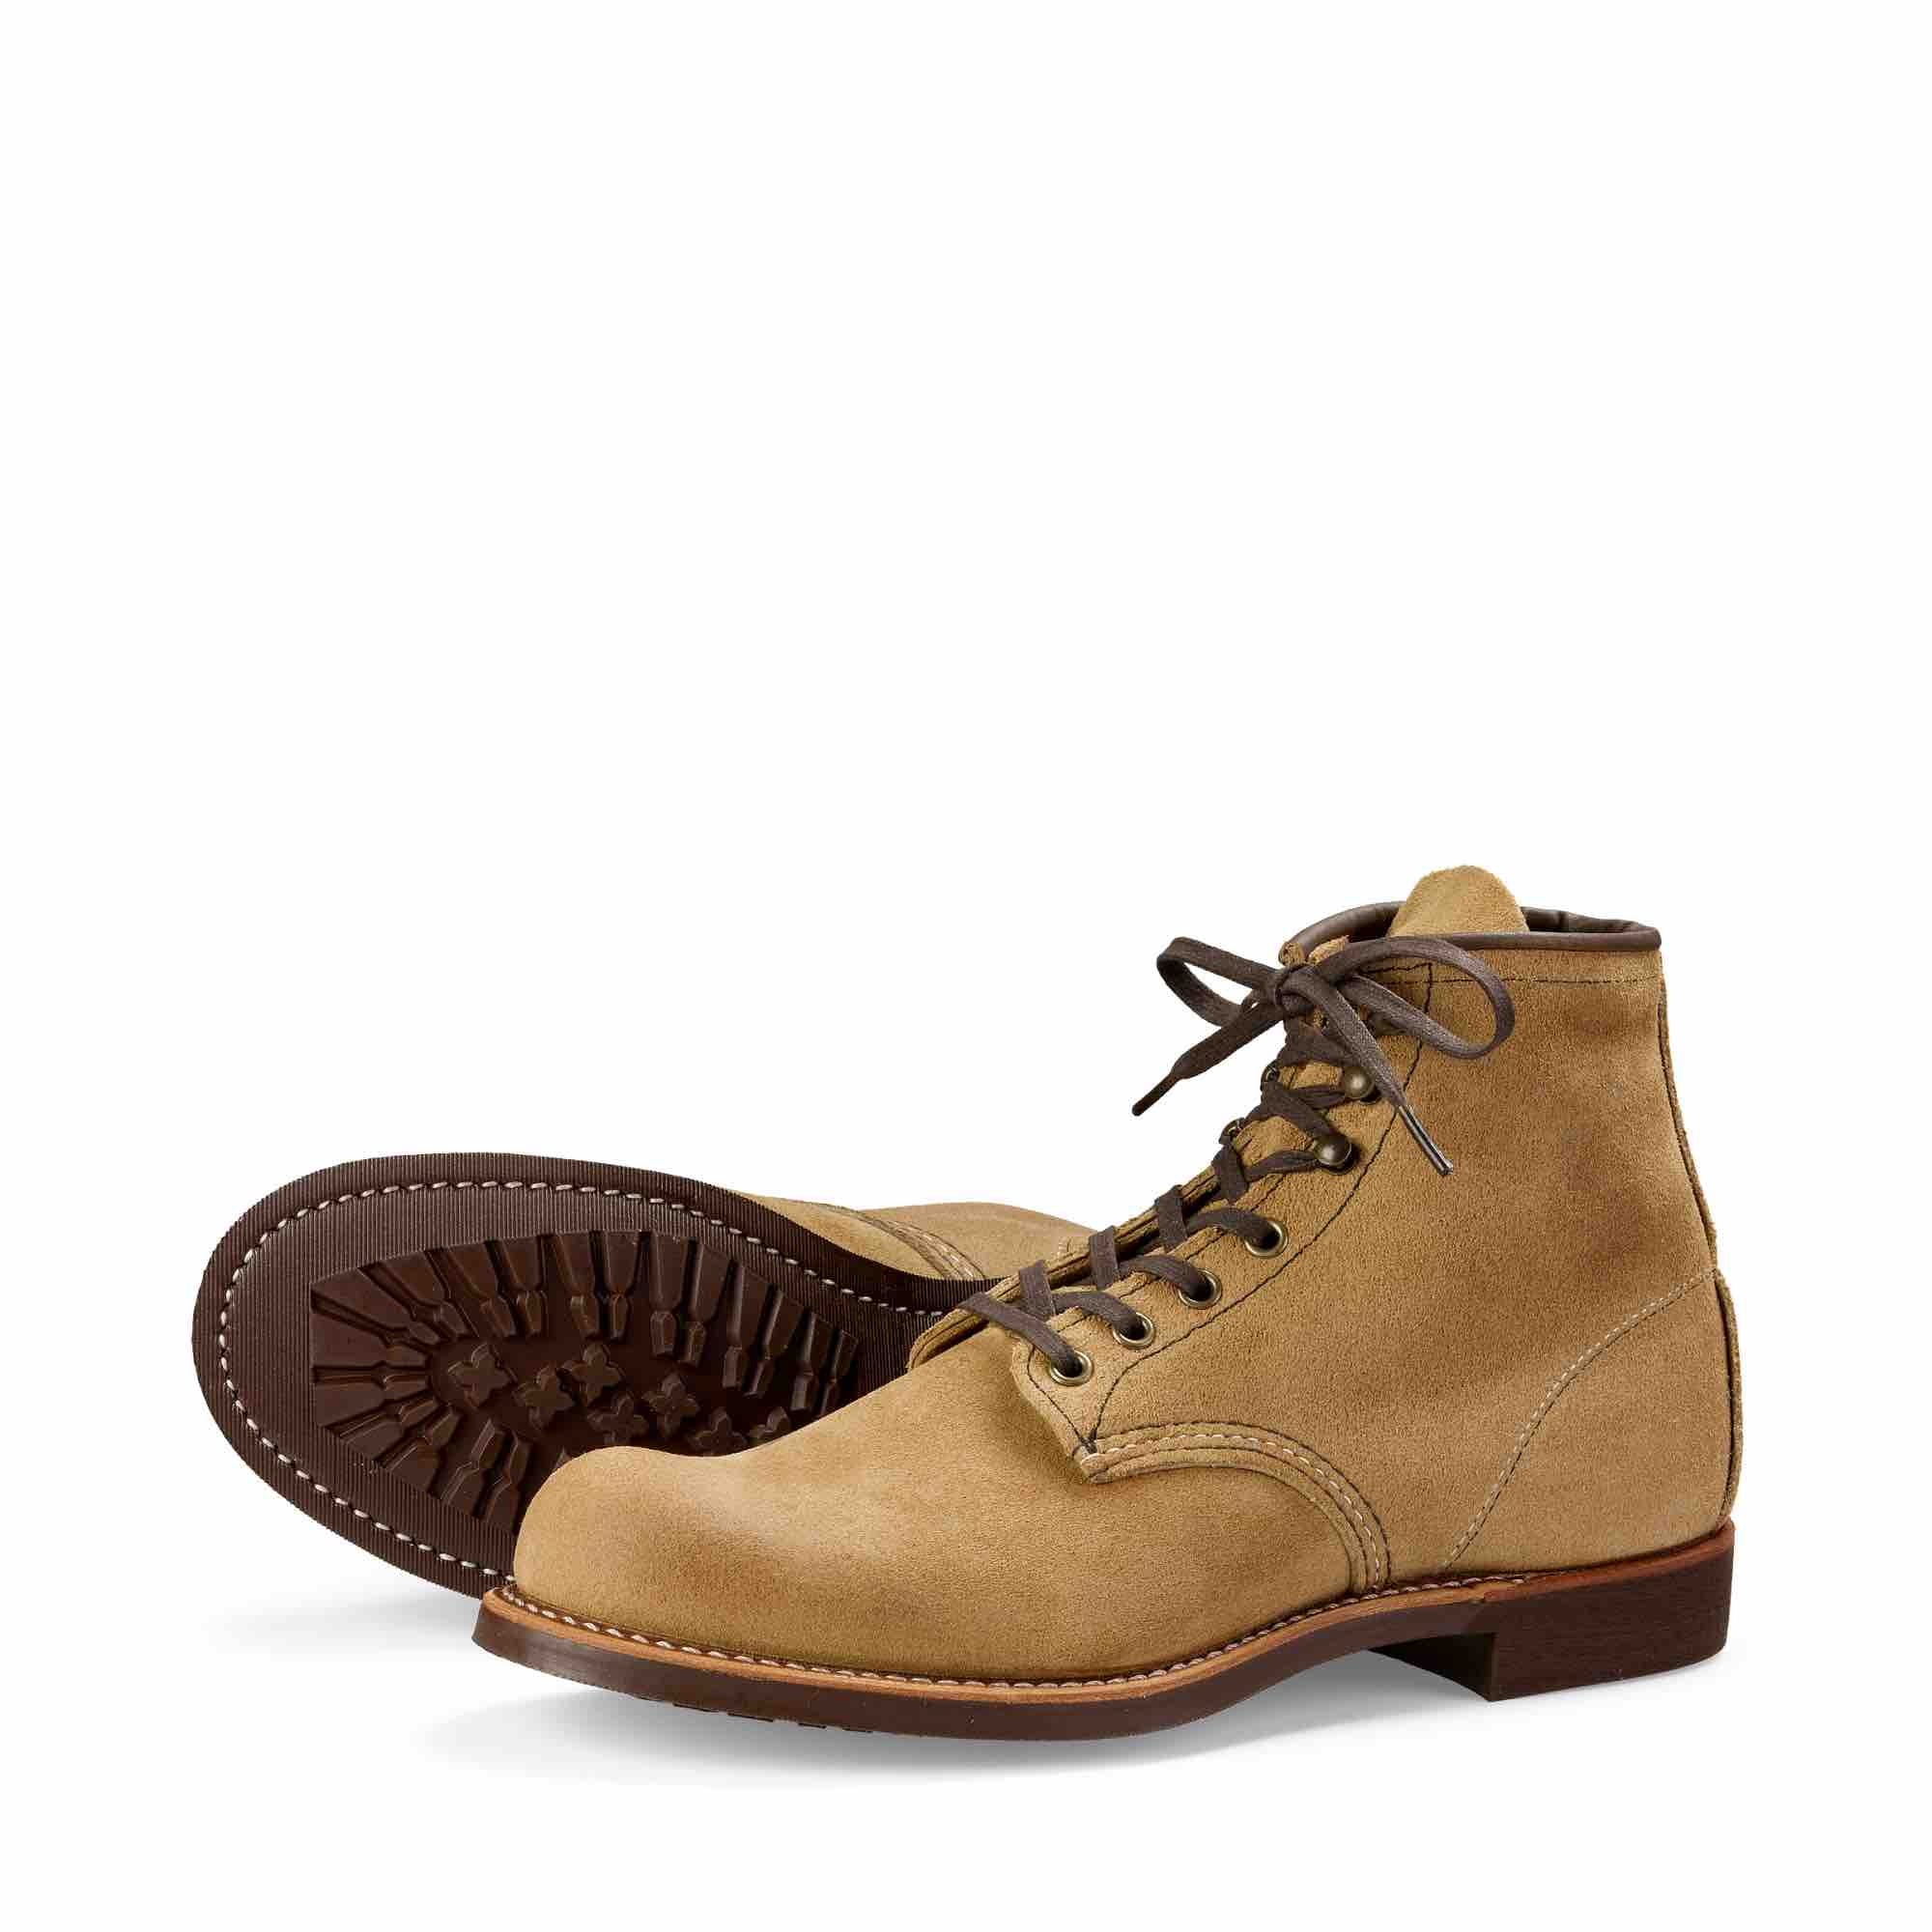 Red Wing Boots Online - Free shipping within Europe - Brund